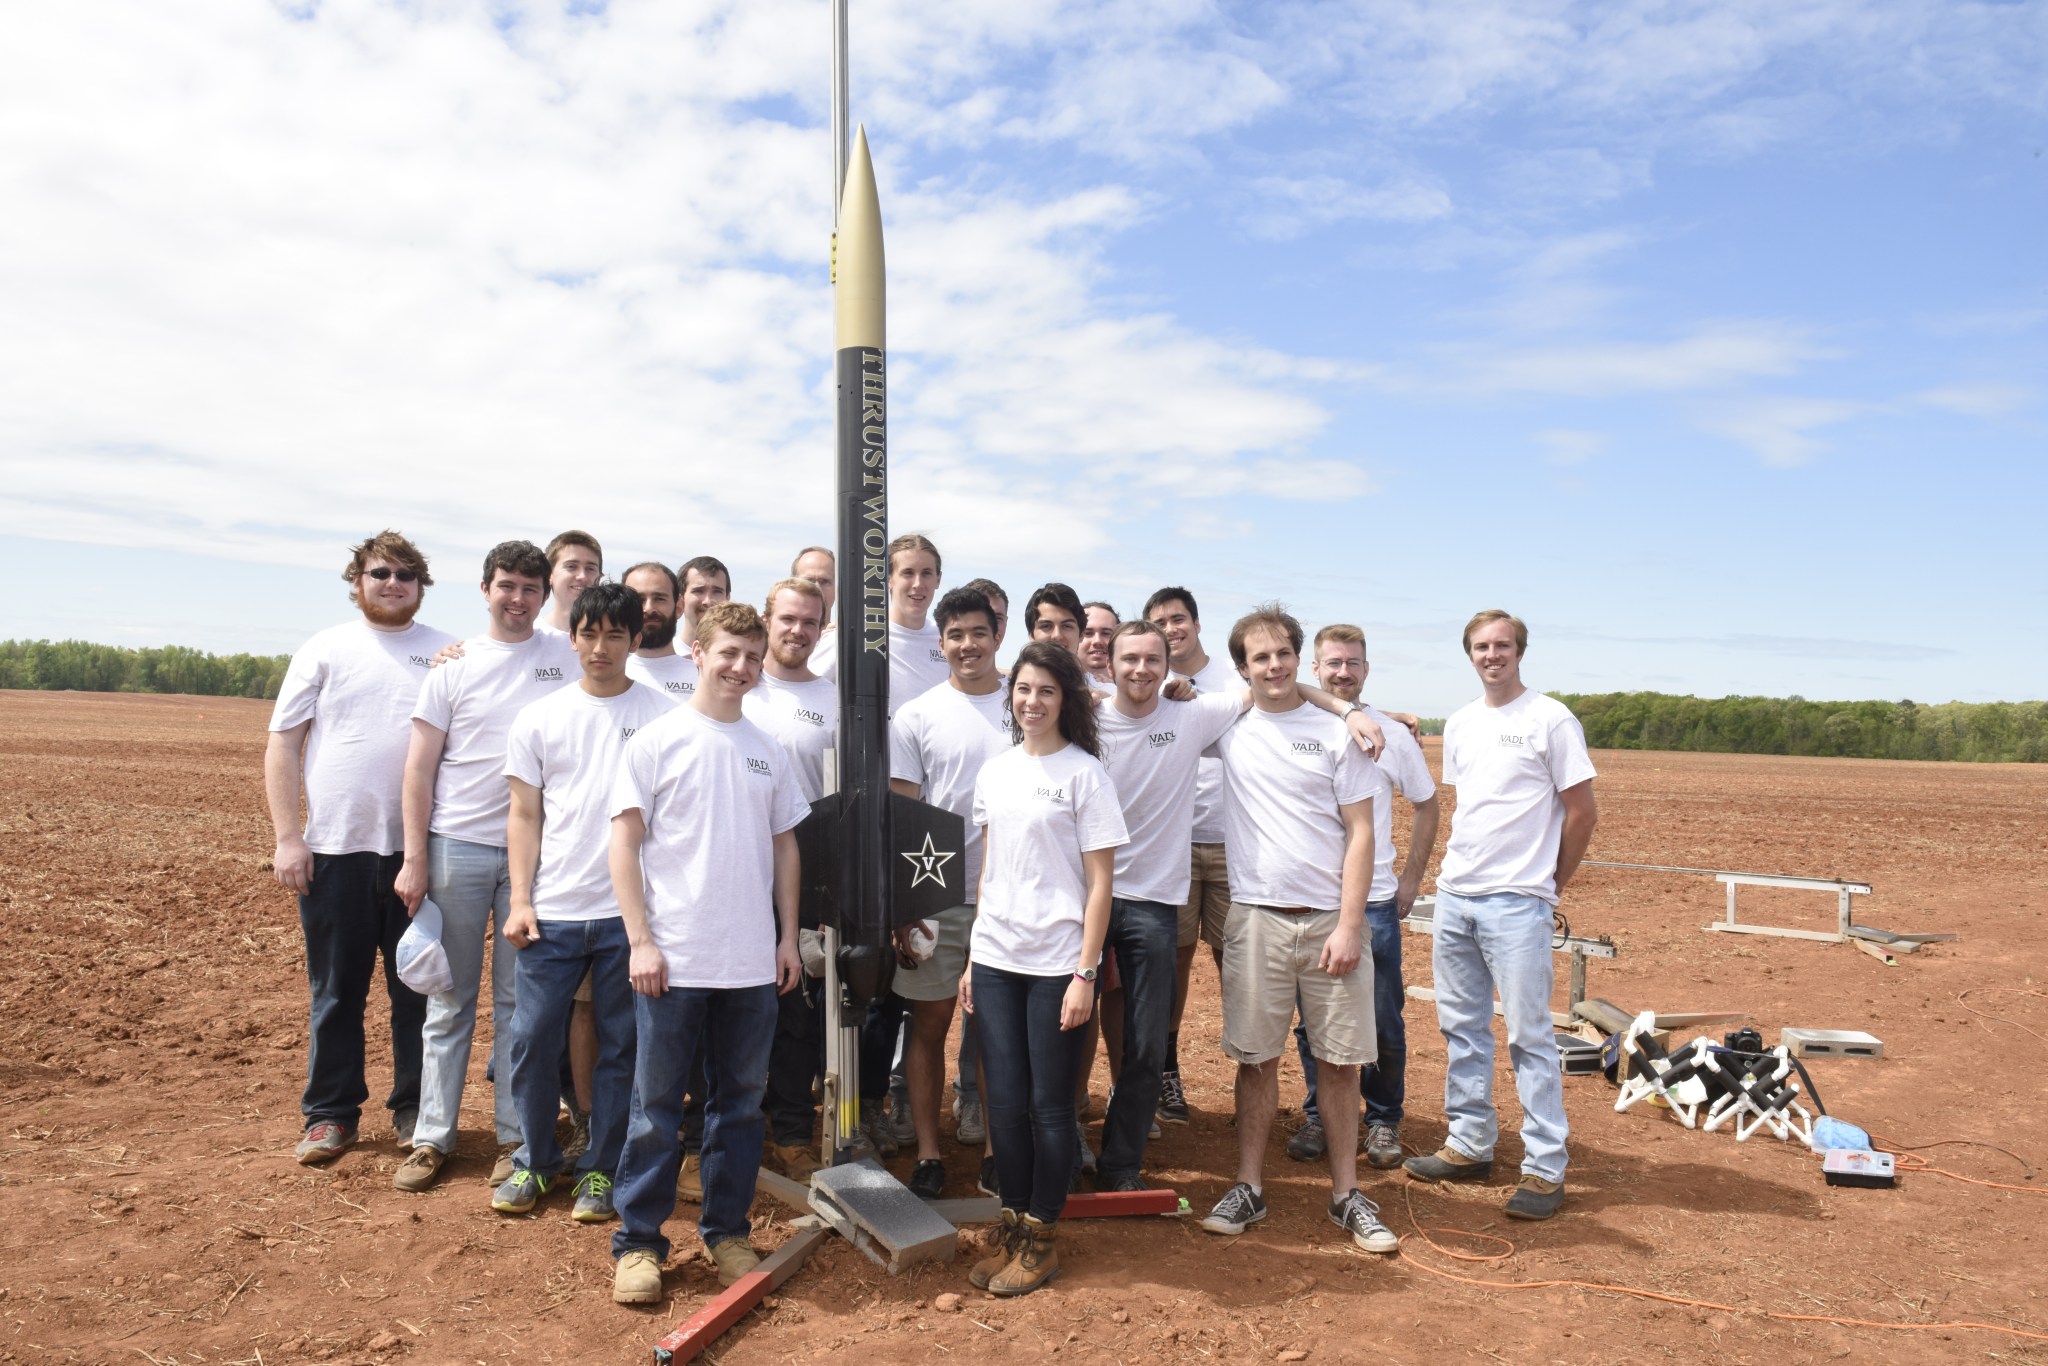 Vanderbilt University of Nashville, Tennessee, won first place at the 2016 Student Launch challenge. 